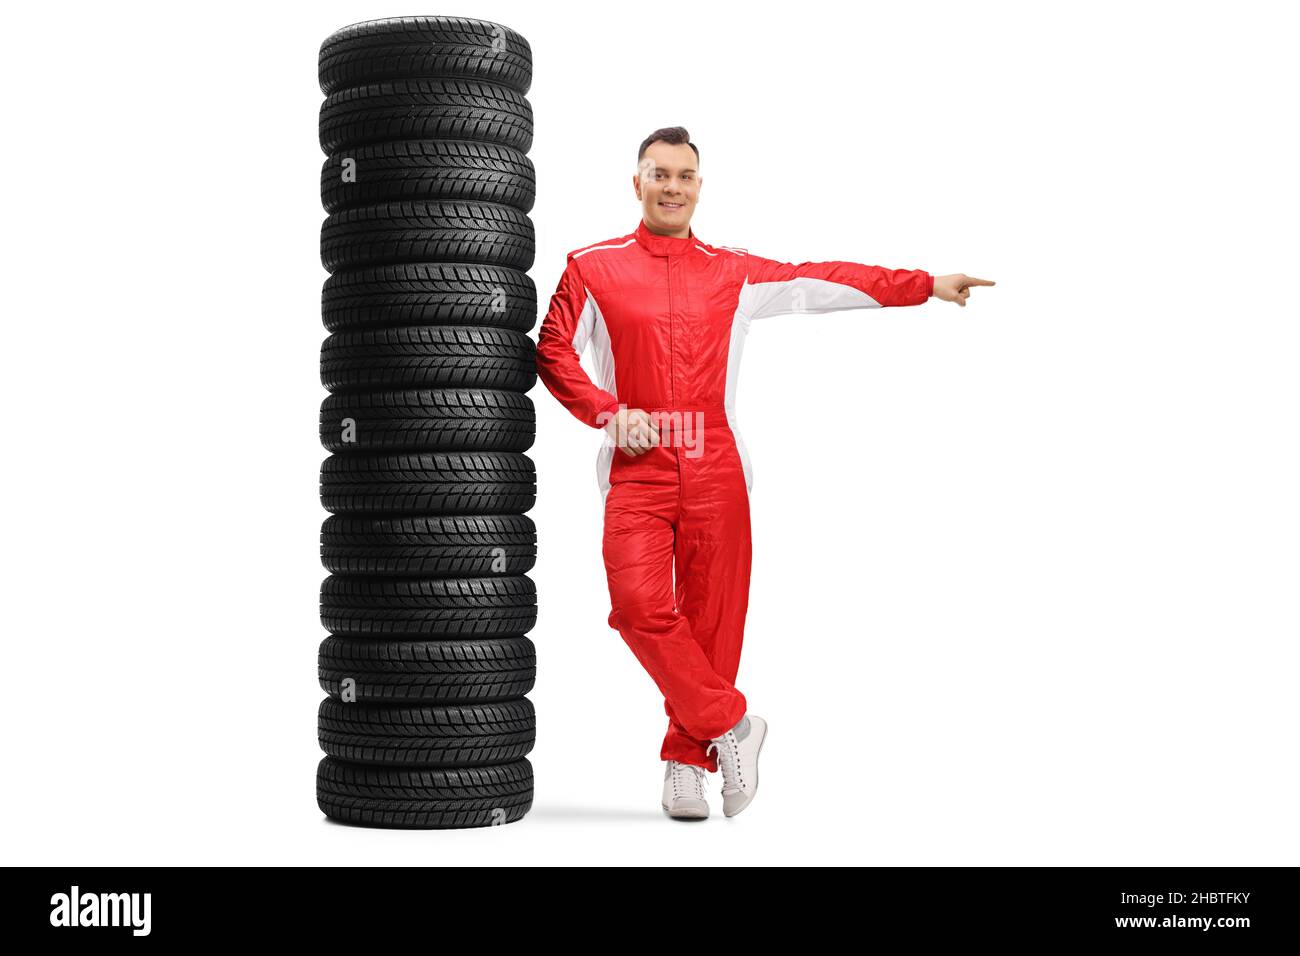 Full length portrait of a racer leaning on a pile of tires and pointing to the side isolated on white background Stock Photo